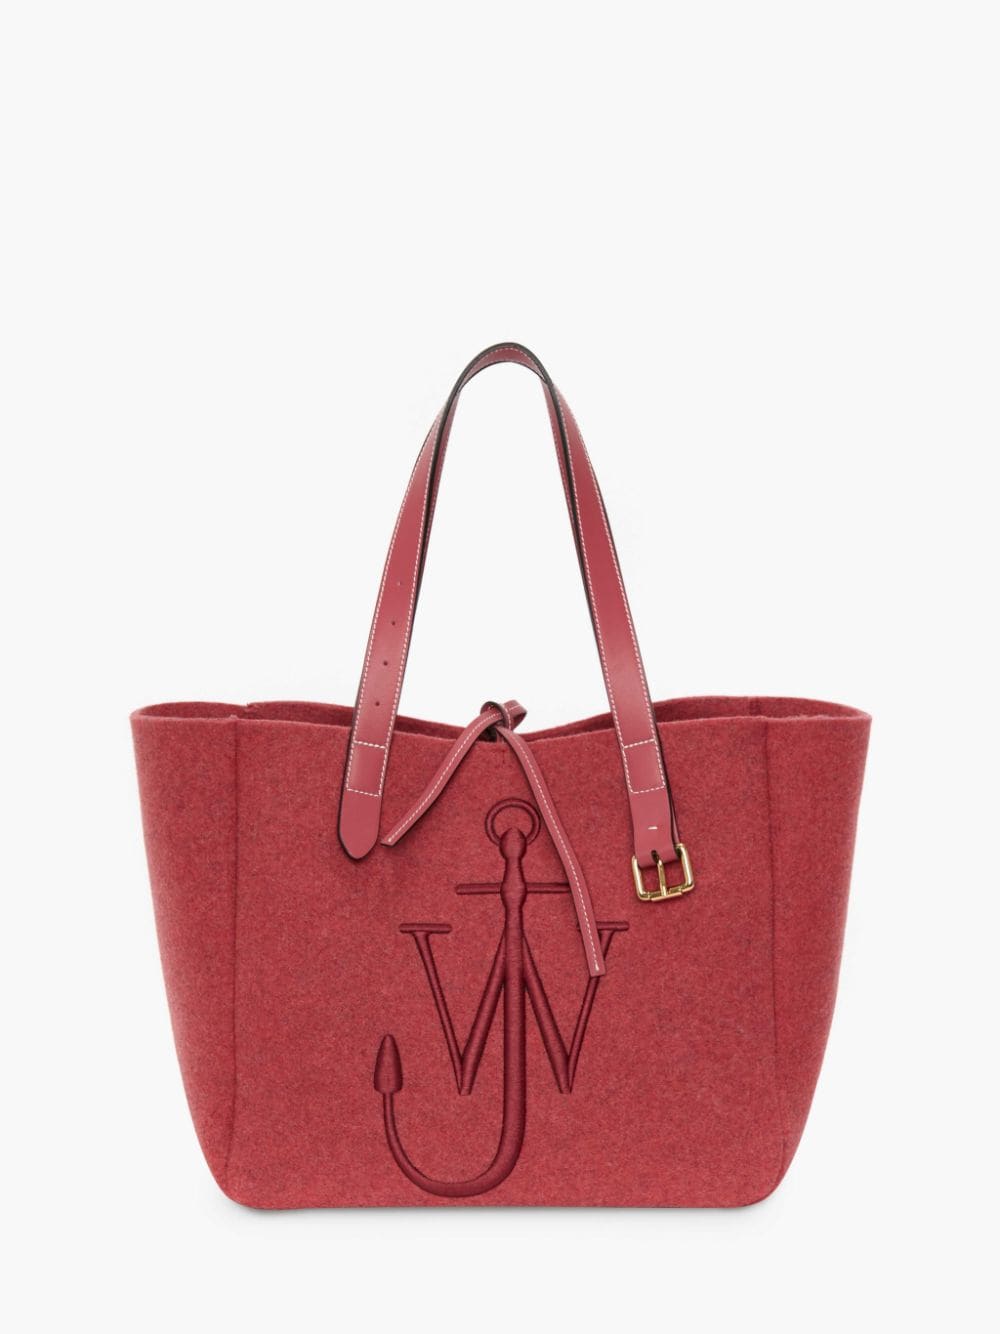 Jw Anderson Outlet: tote bags for woman - Leather